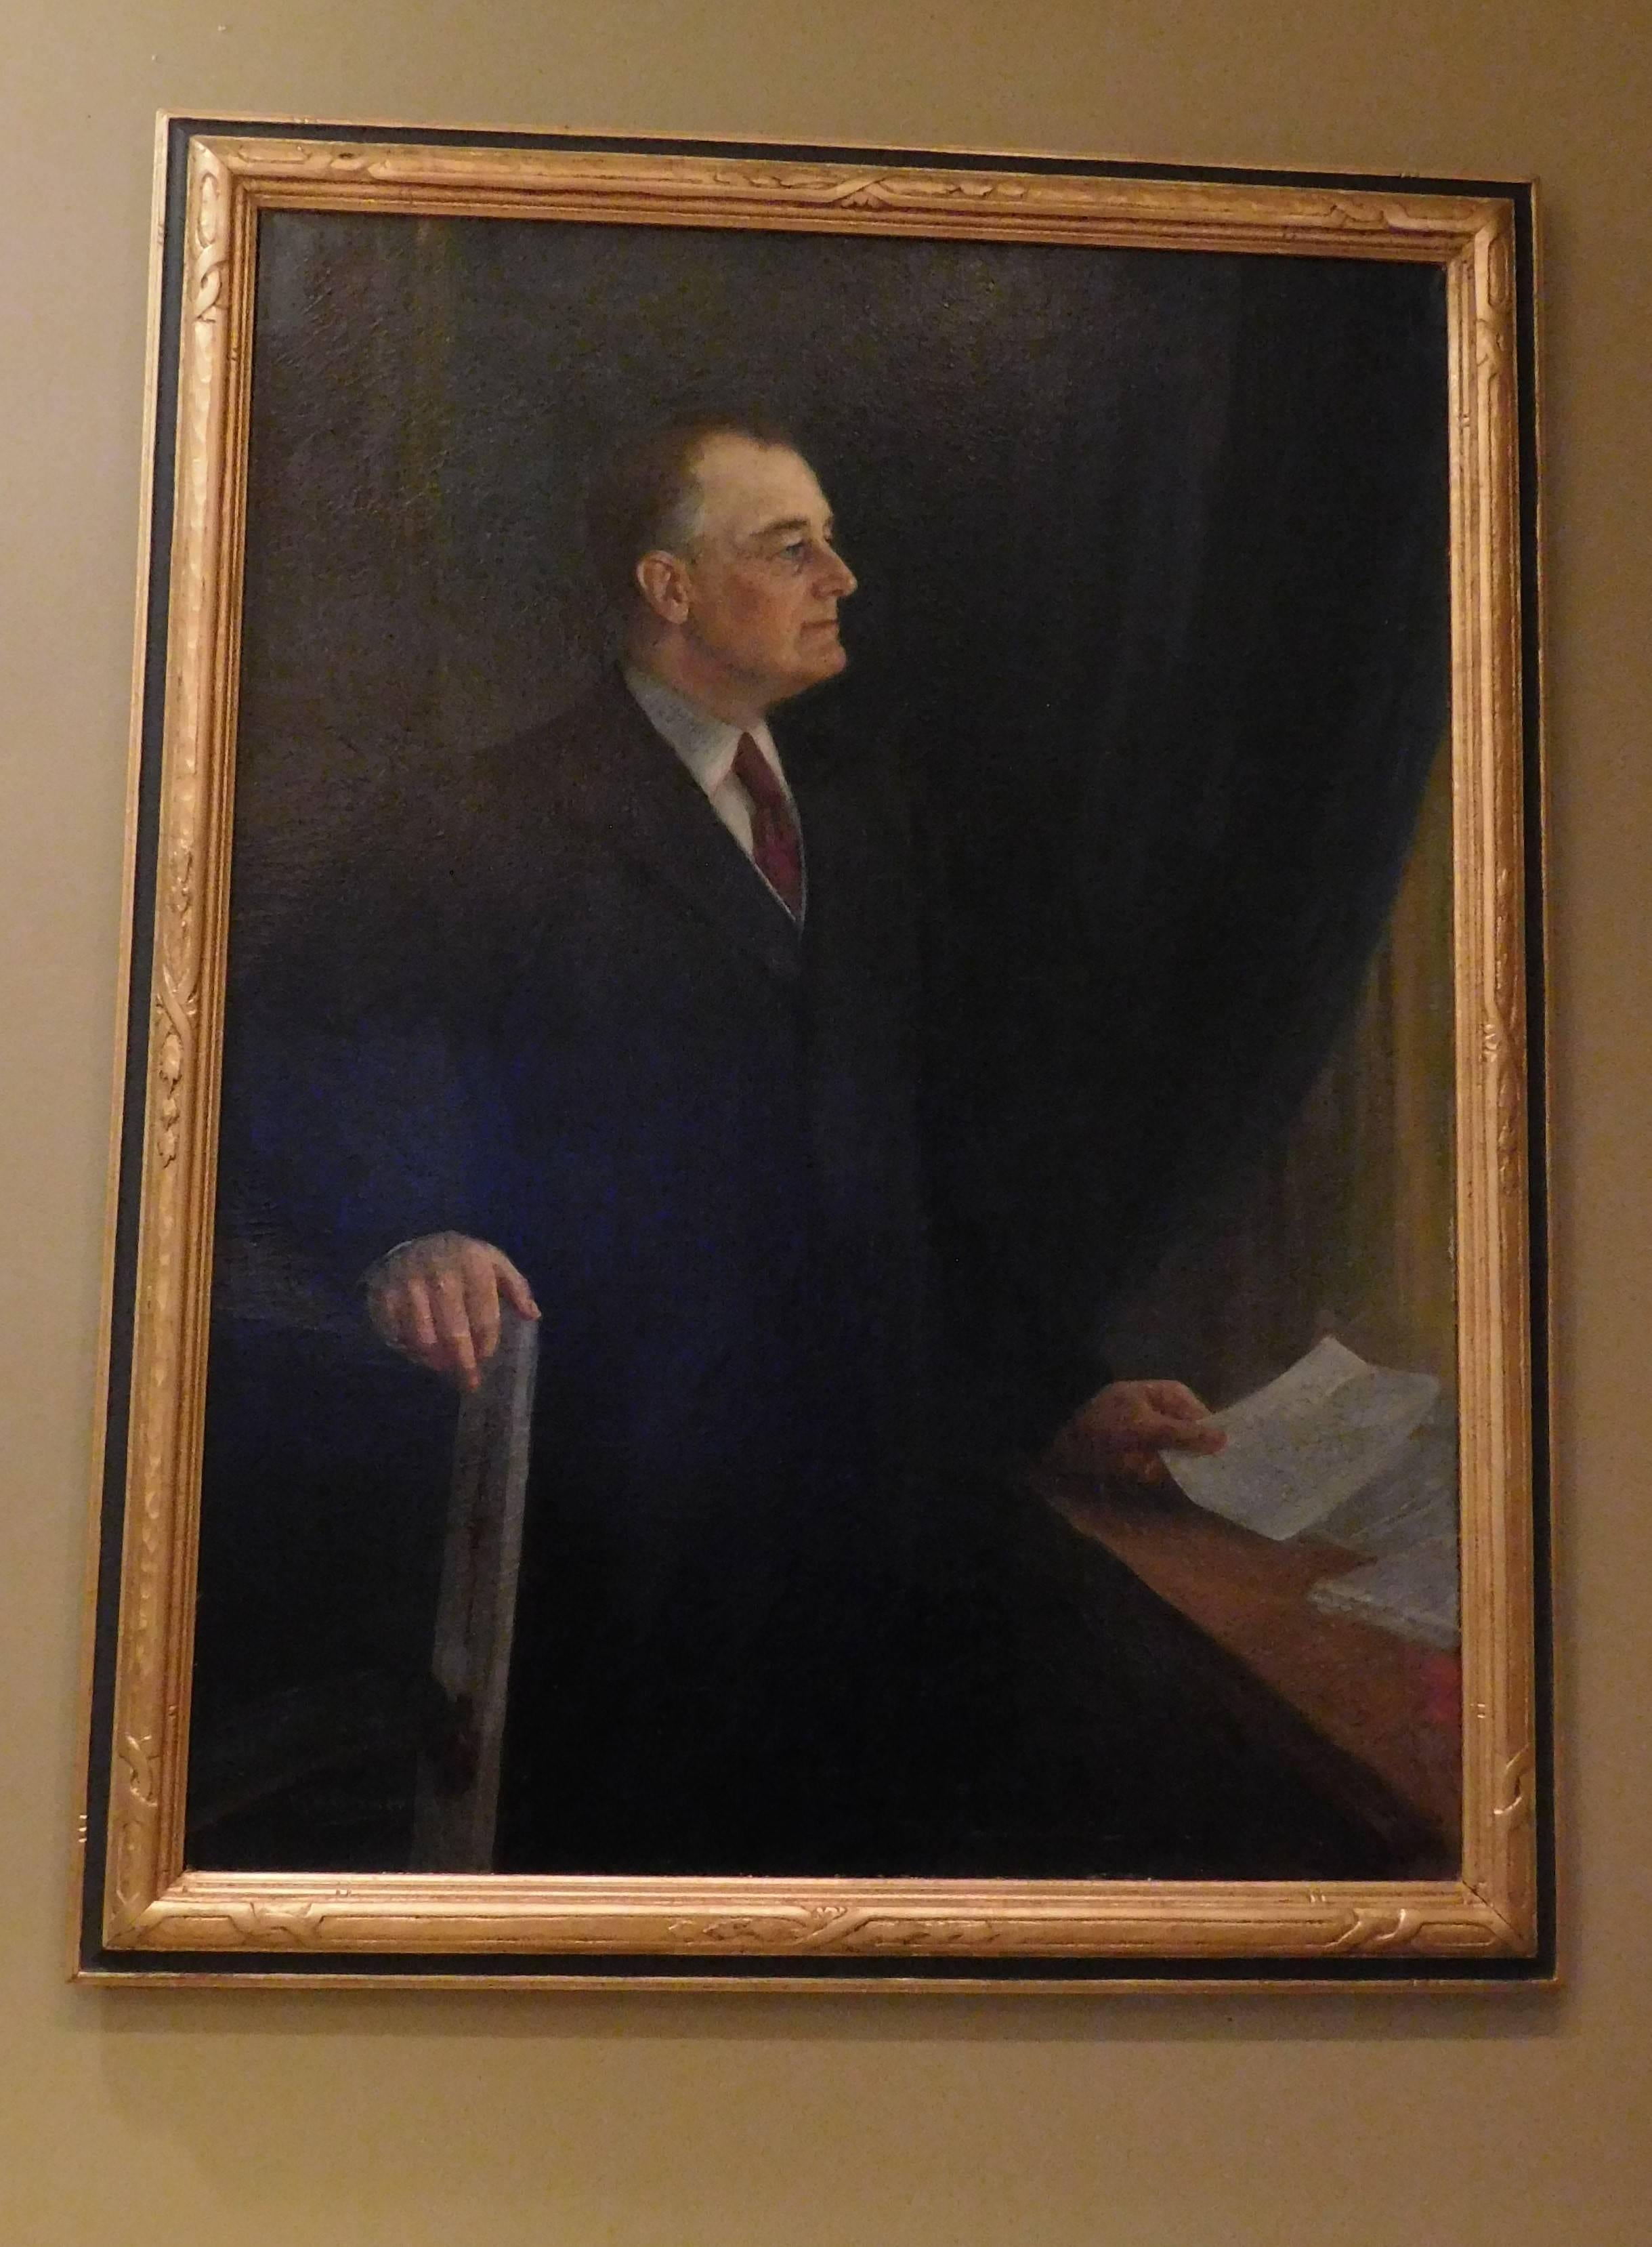 This painting of President Franklin Delano Roosevelt was done in the second year of his presidency. He is shown standing, looking out a window in what appears to be his upstairs office in the White House. Signed lower left corner: N R Brewer 1934.